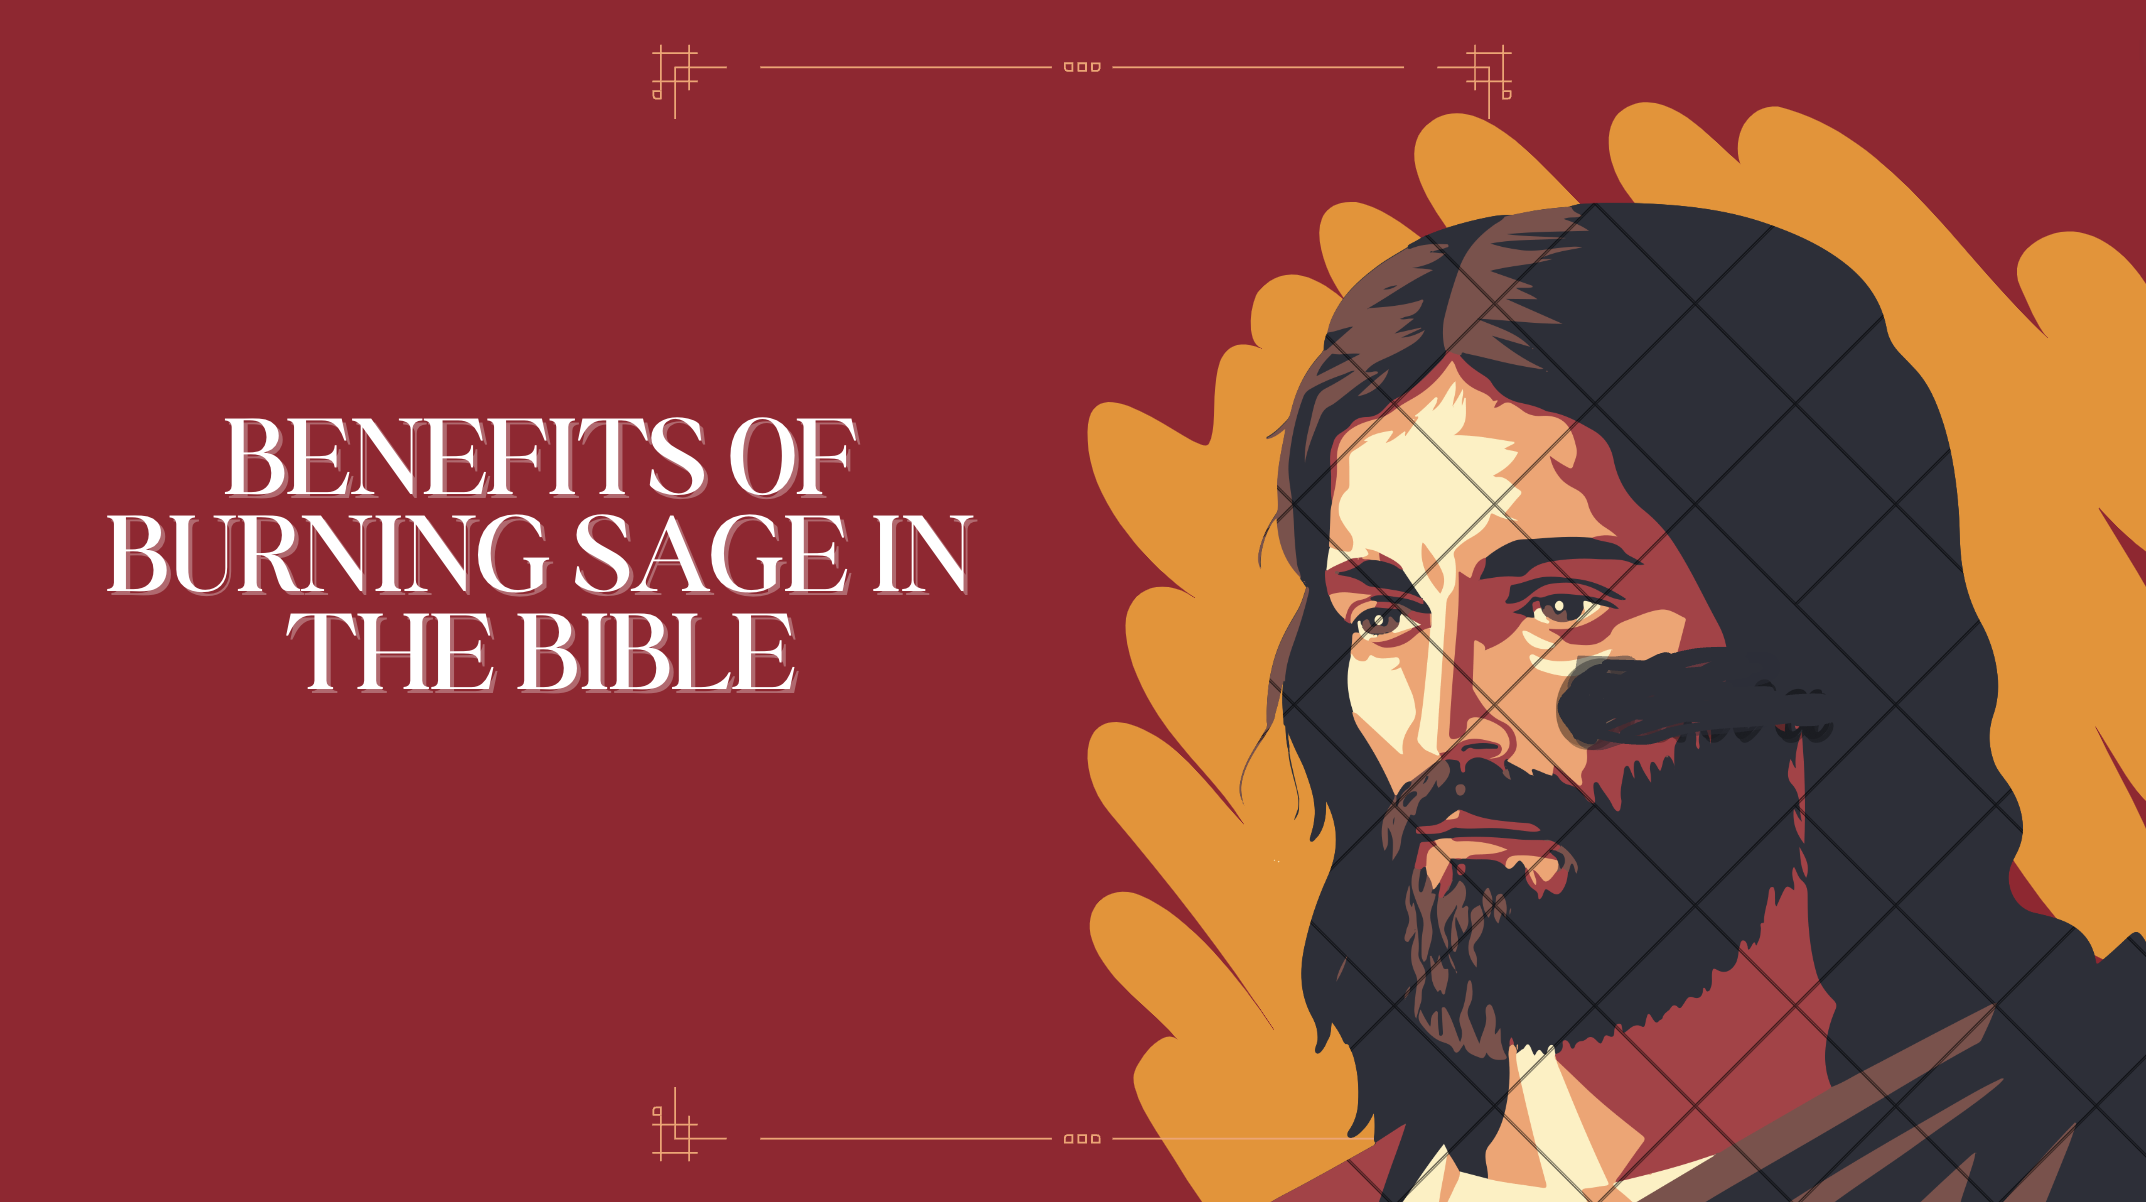 Benefits of Burning Sage in the Bible